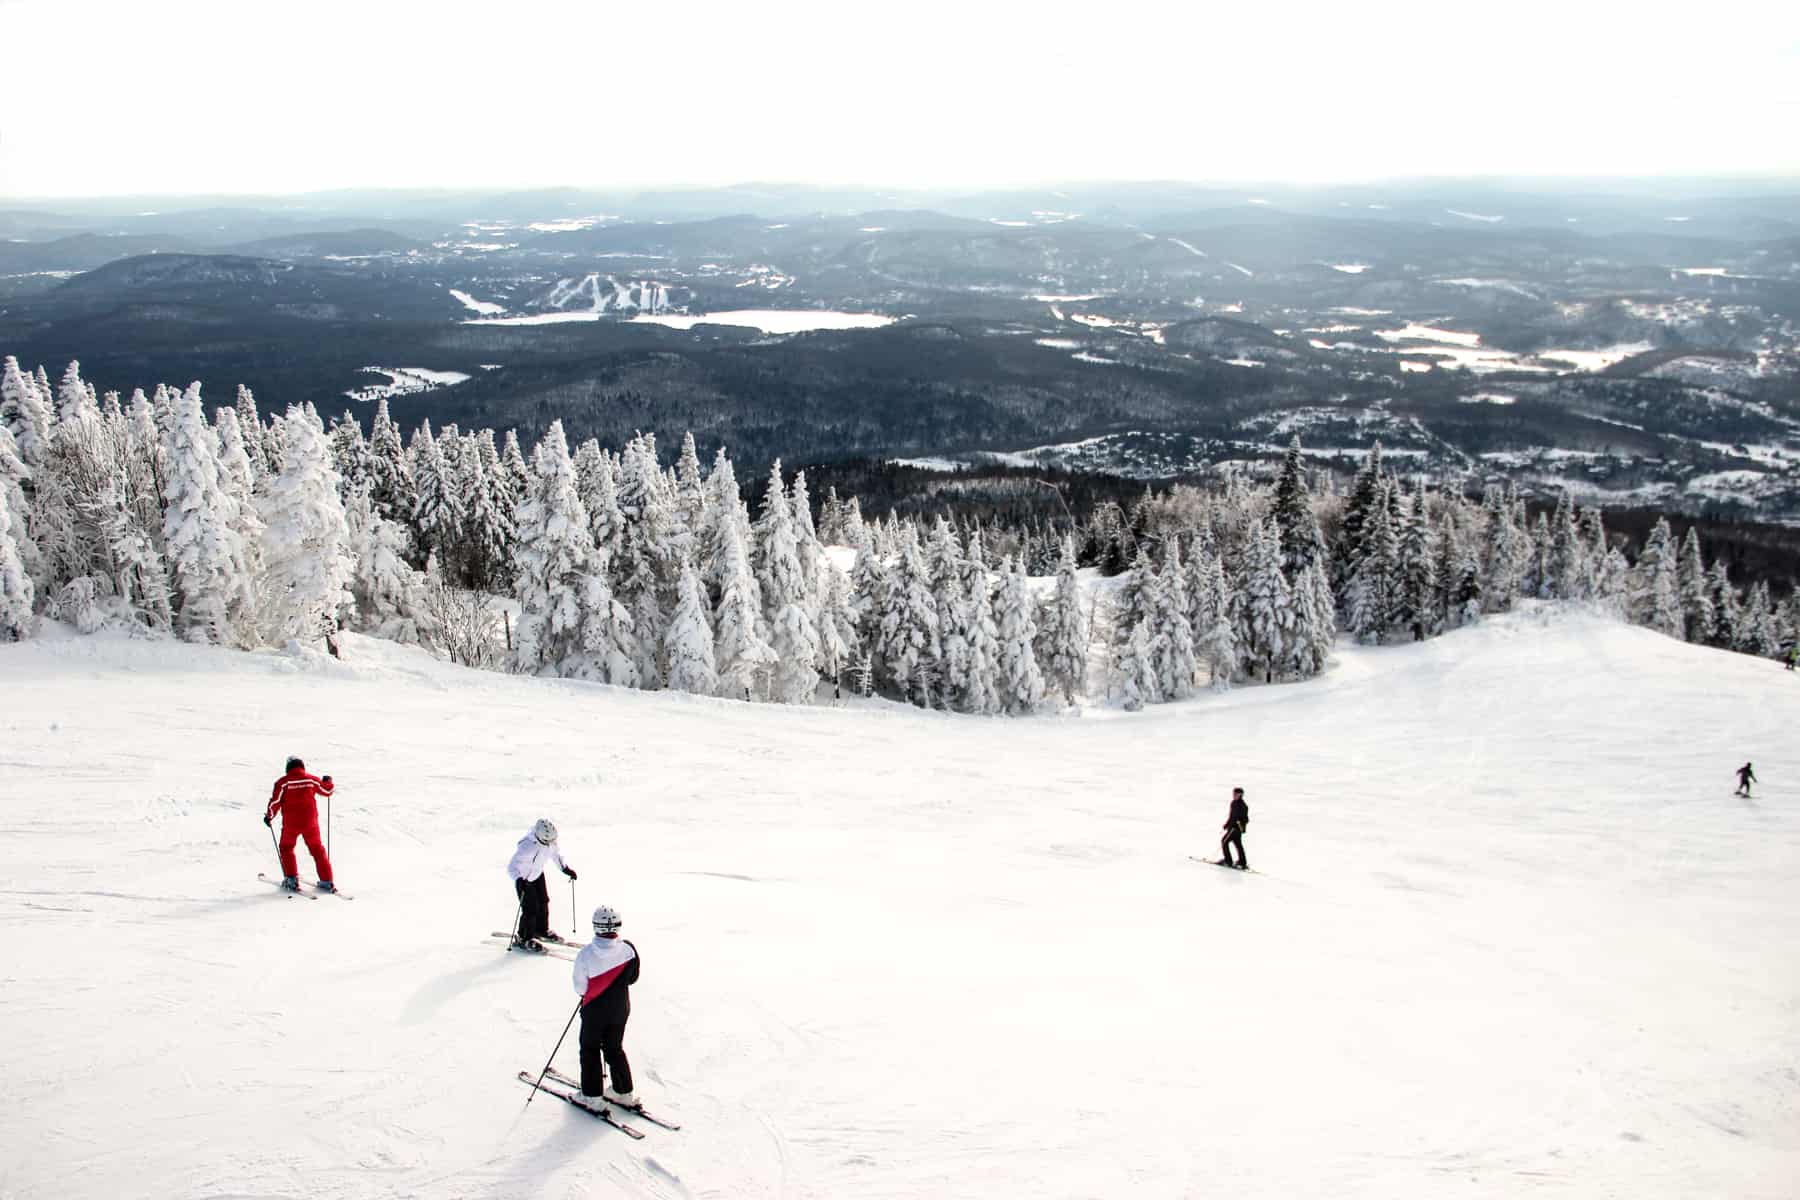 Skiers on a mountain slope in the Mont Tremblant resort.